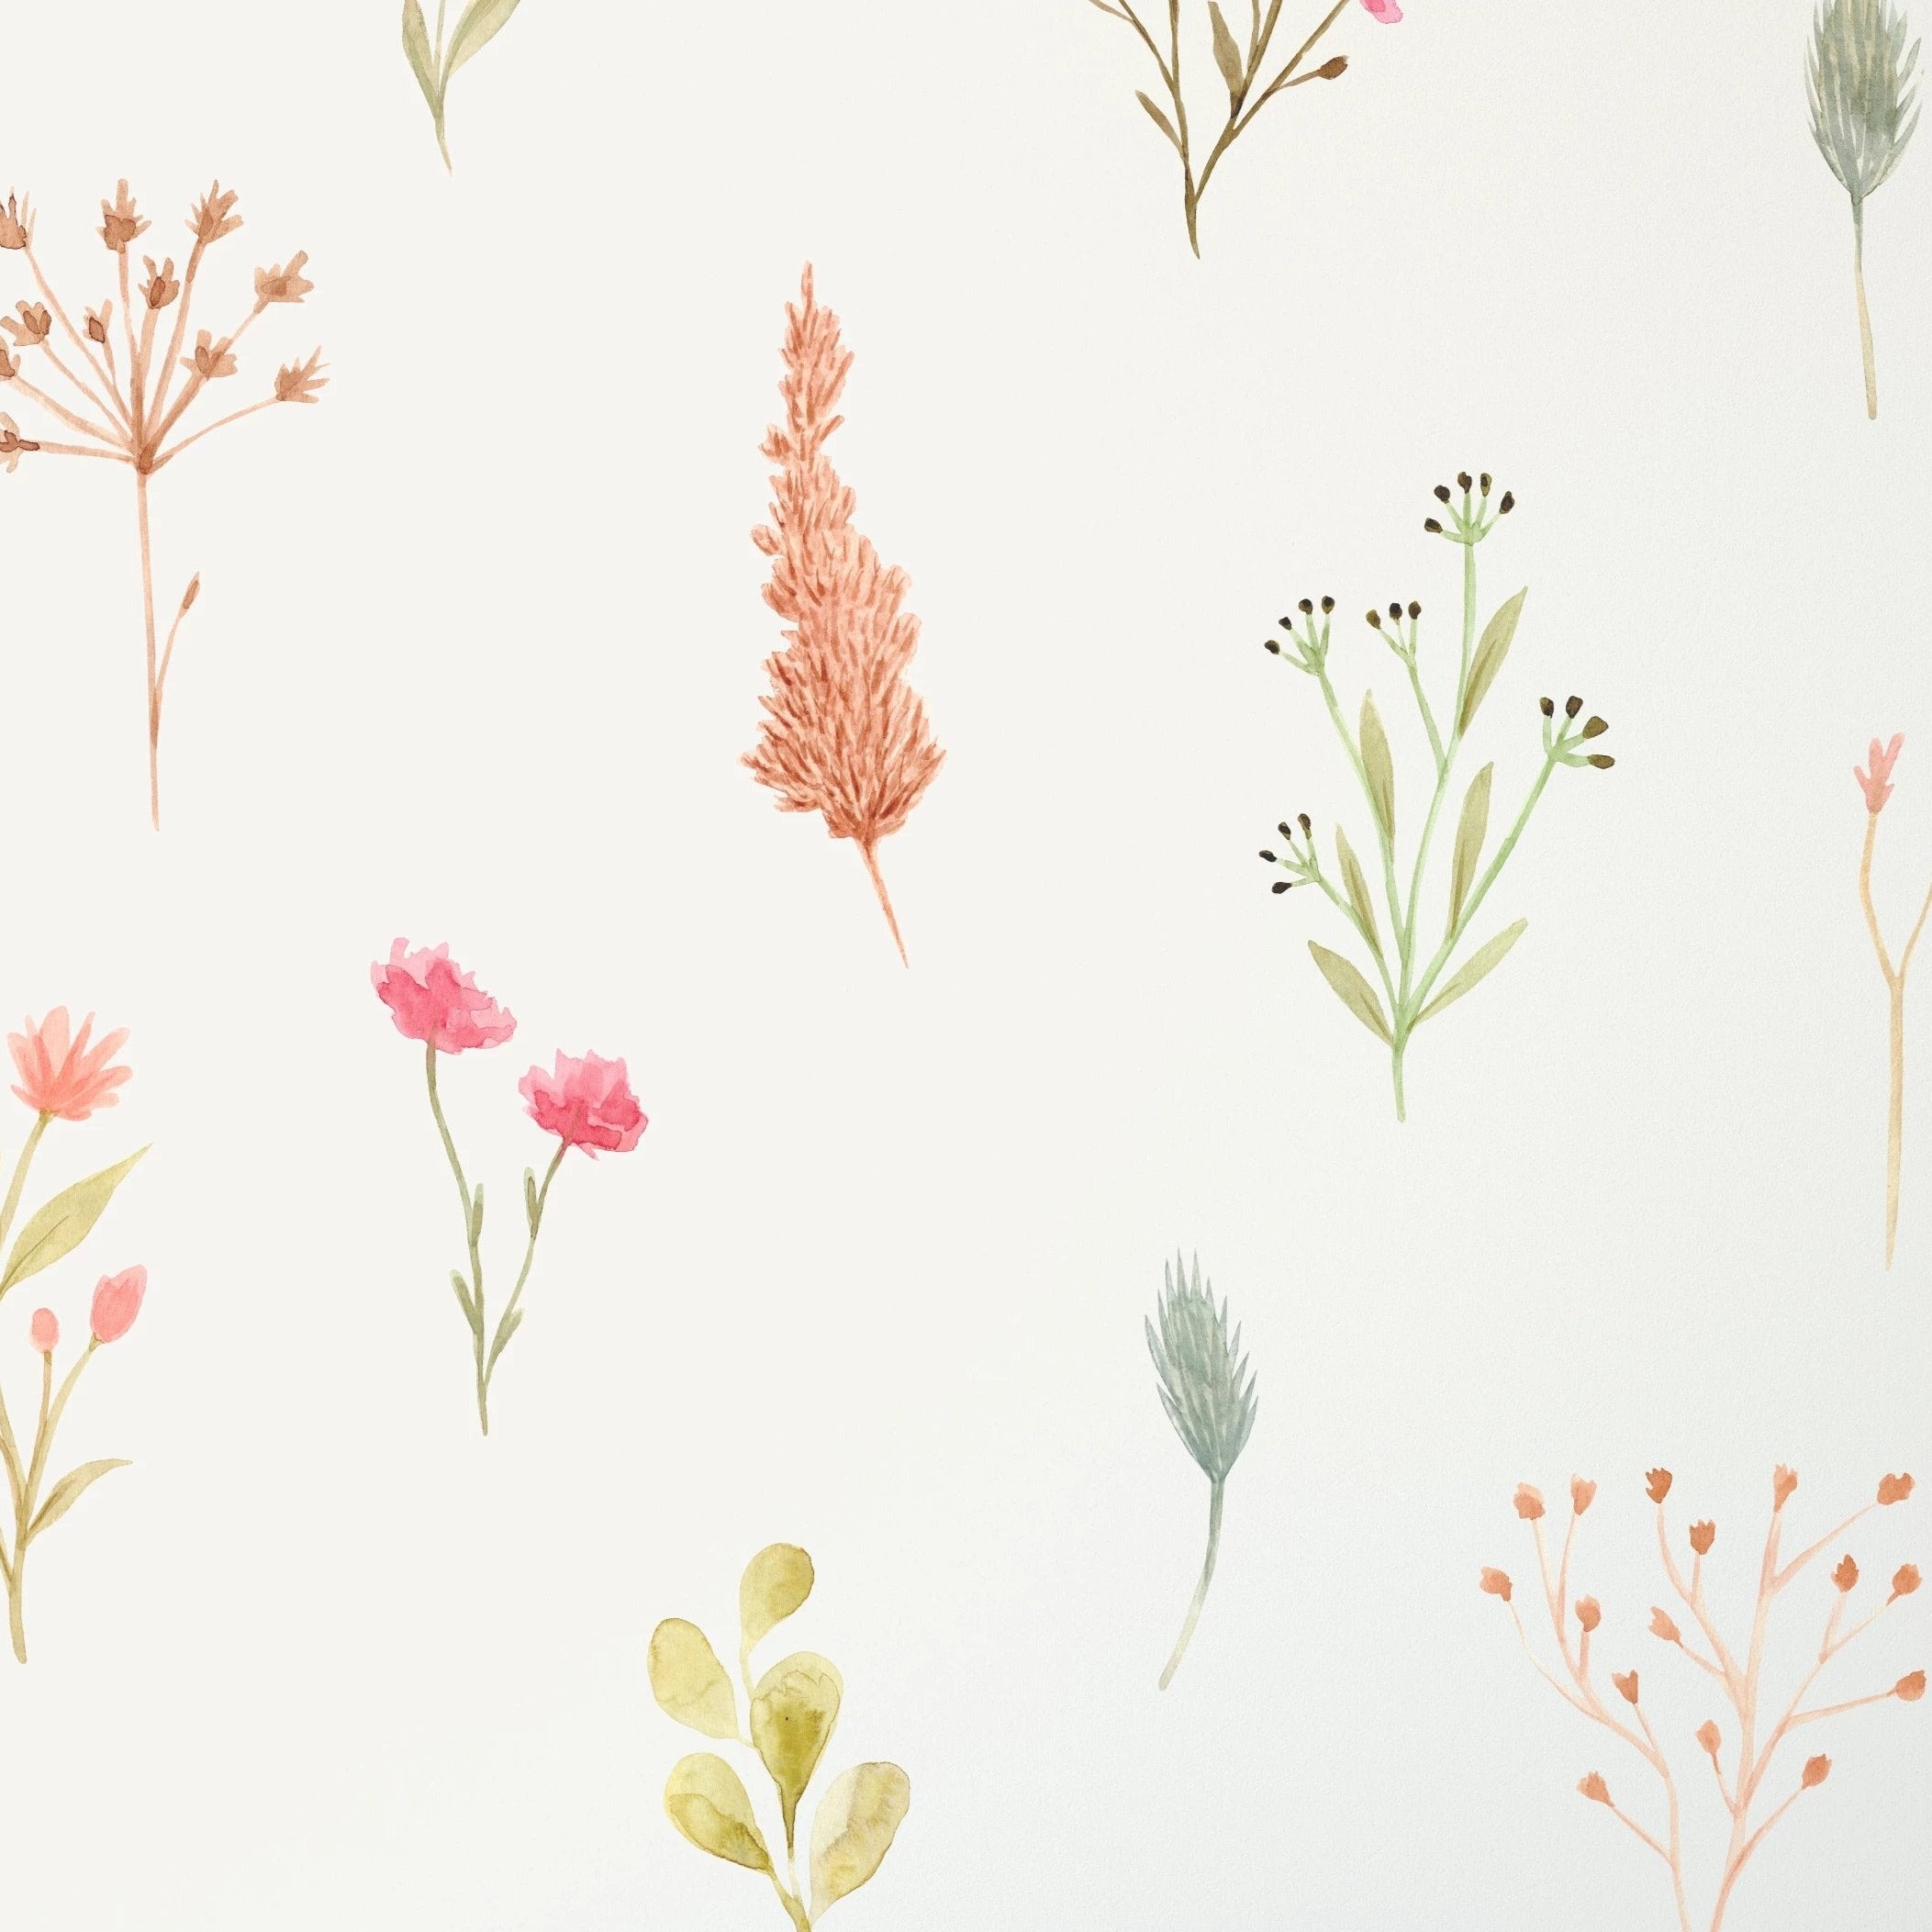 A detailed shot of the Watercolour Floral Wallpaper II showcasing a variety of flowers and leaves in watercolor style, with soft pastels and bright accents creating a dynamic and fresh pattern that brings a lively yet soothing atmosphere to any room.